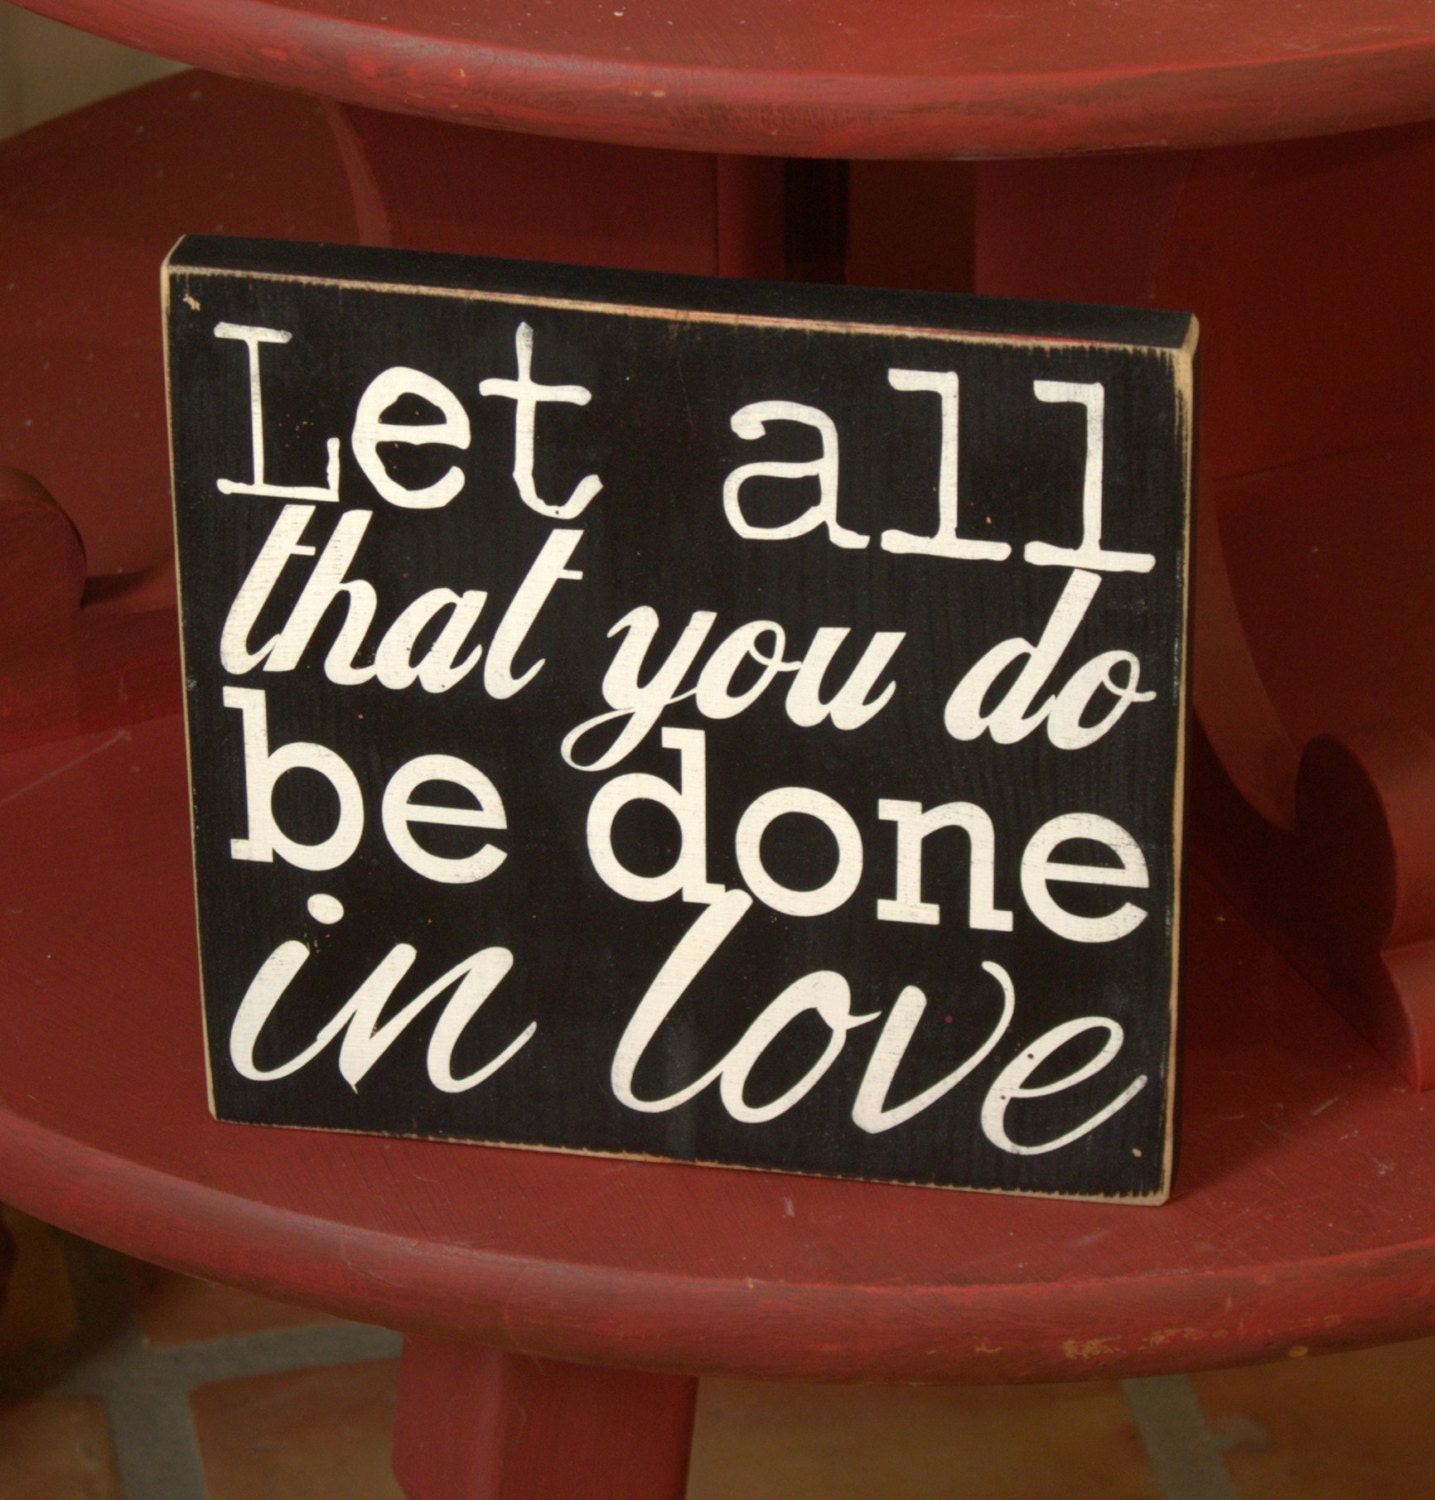 let all that you do be done in love simply southern shirt